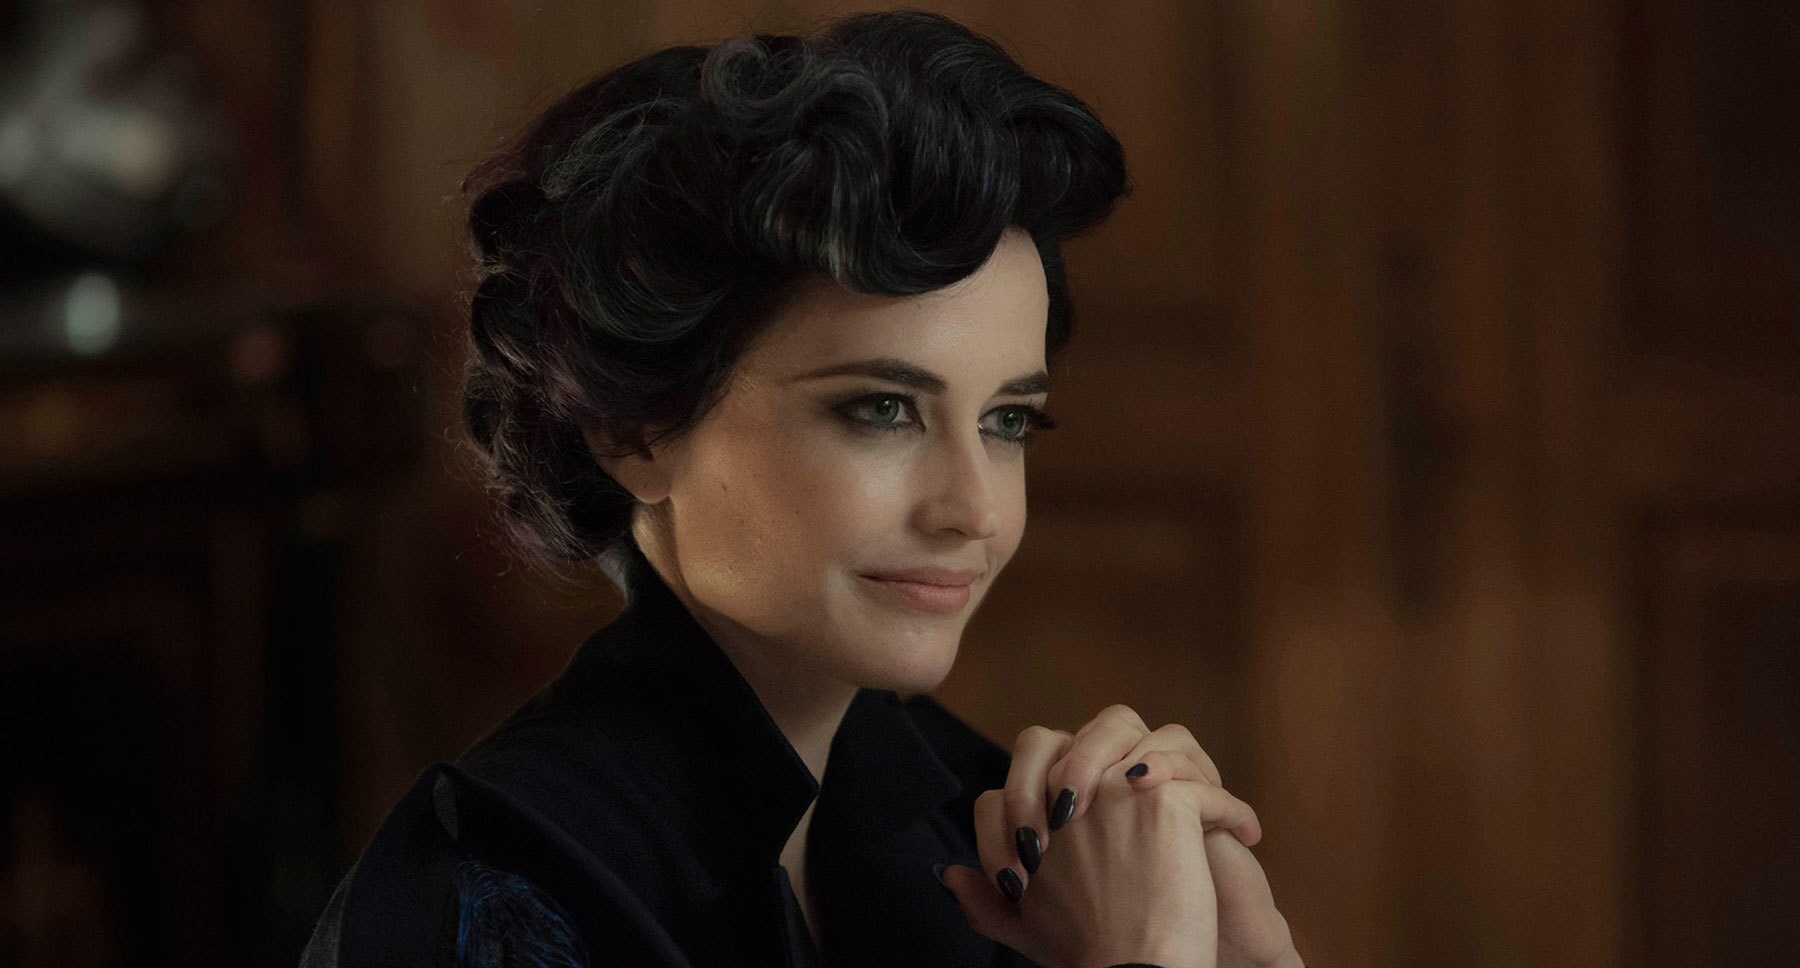 Actor Eva Green as Miss Peregrine in the movie "Miss Peregrine's Home for Peculiar Children"